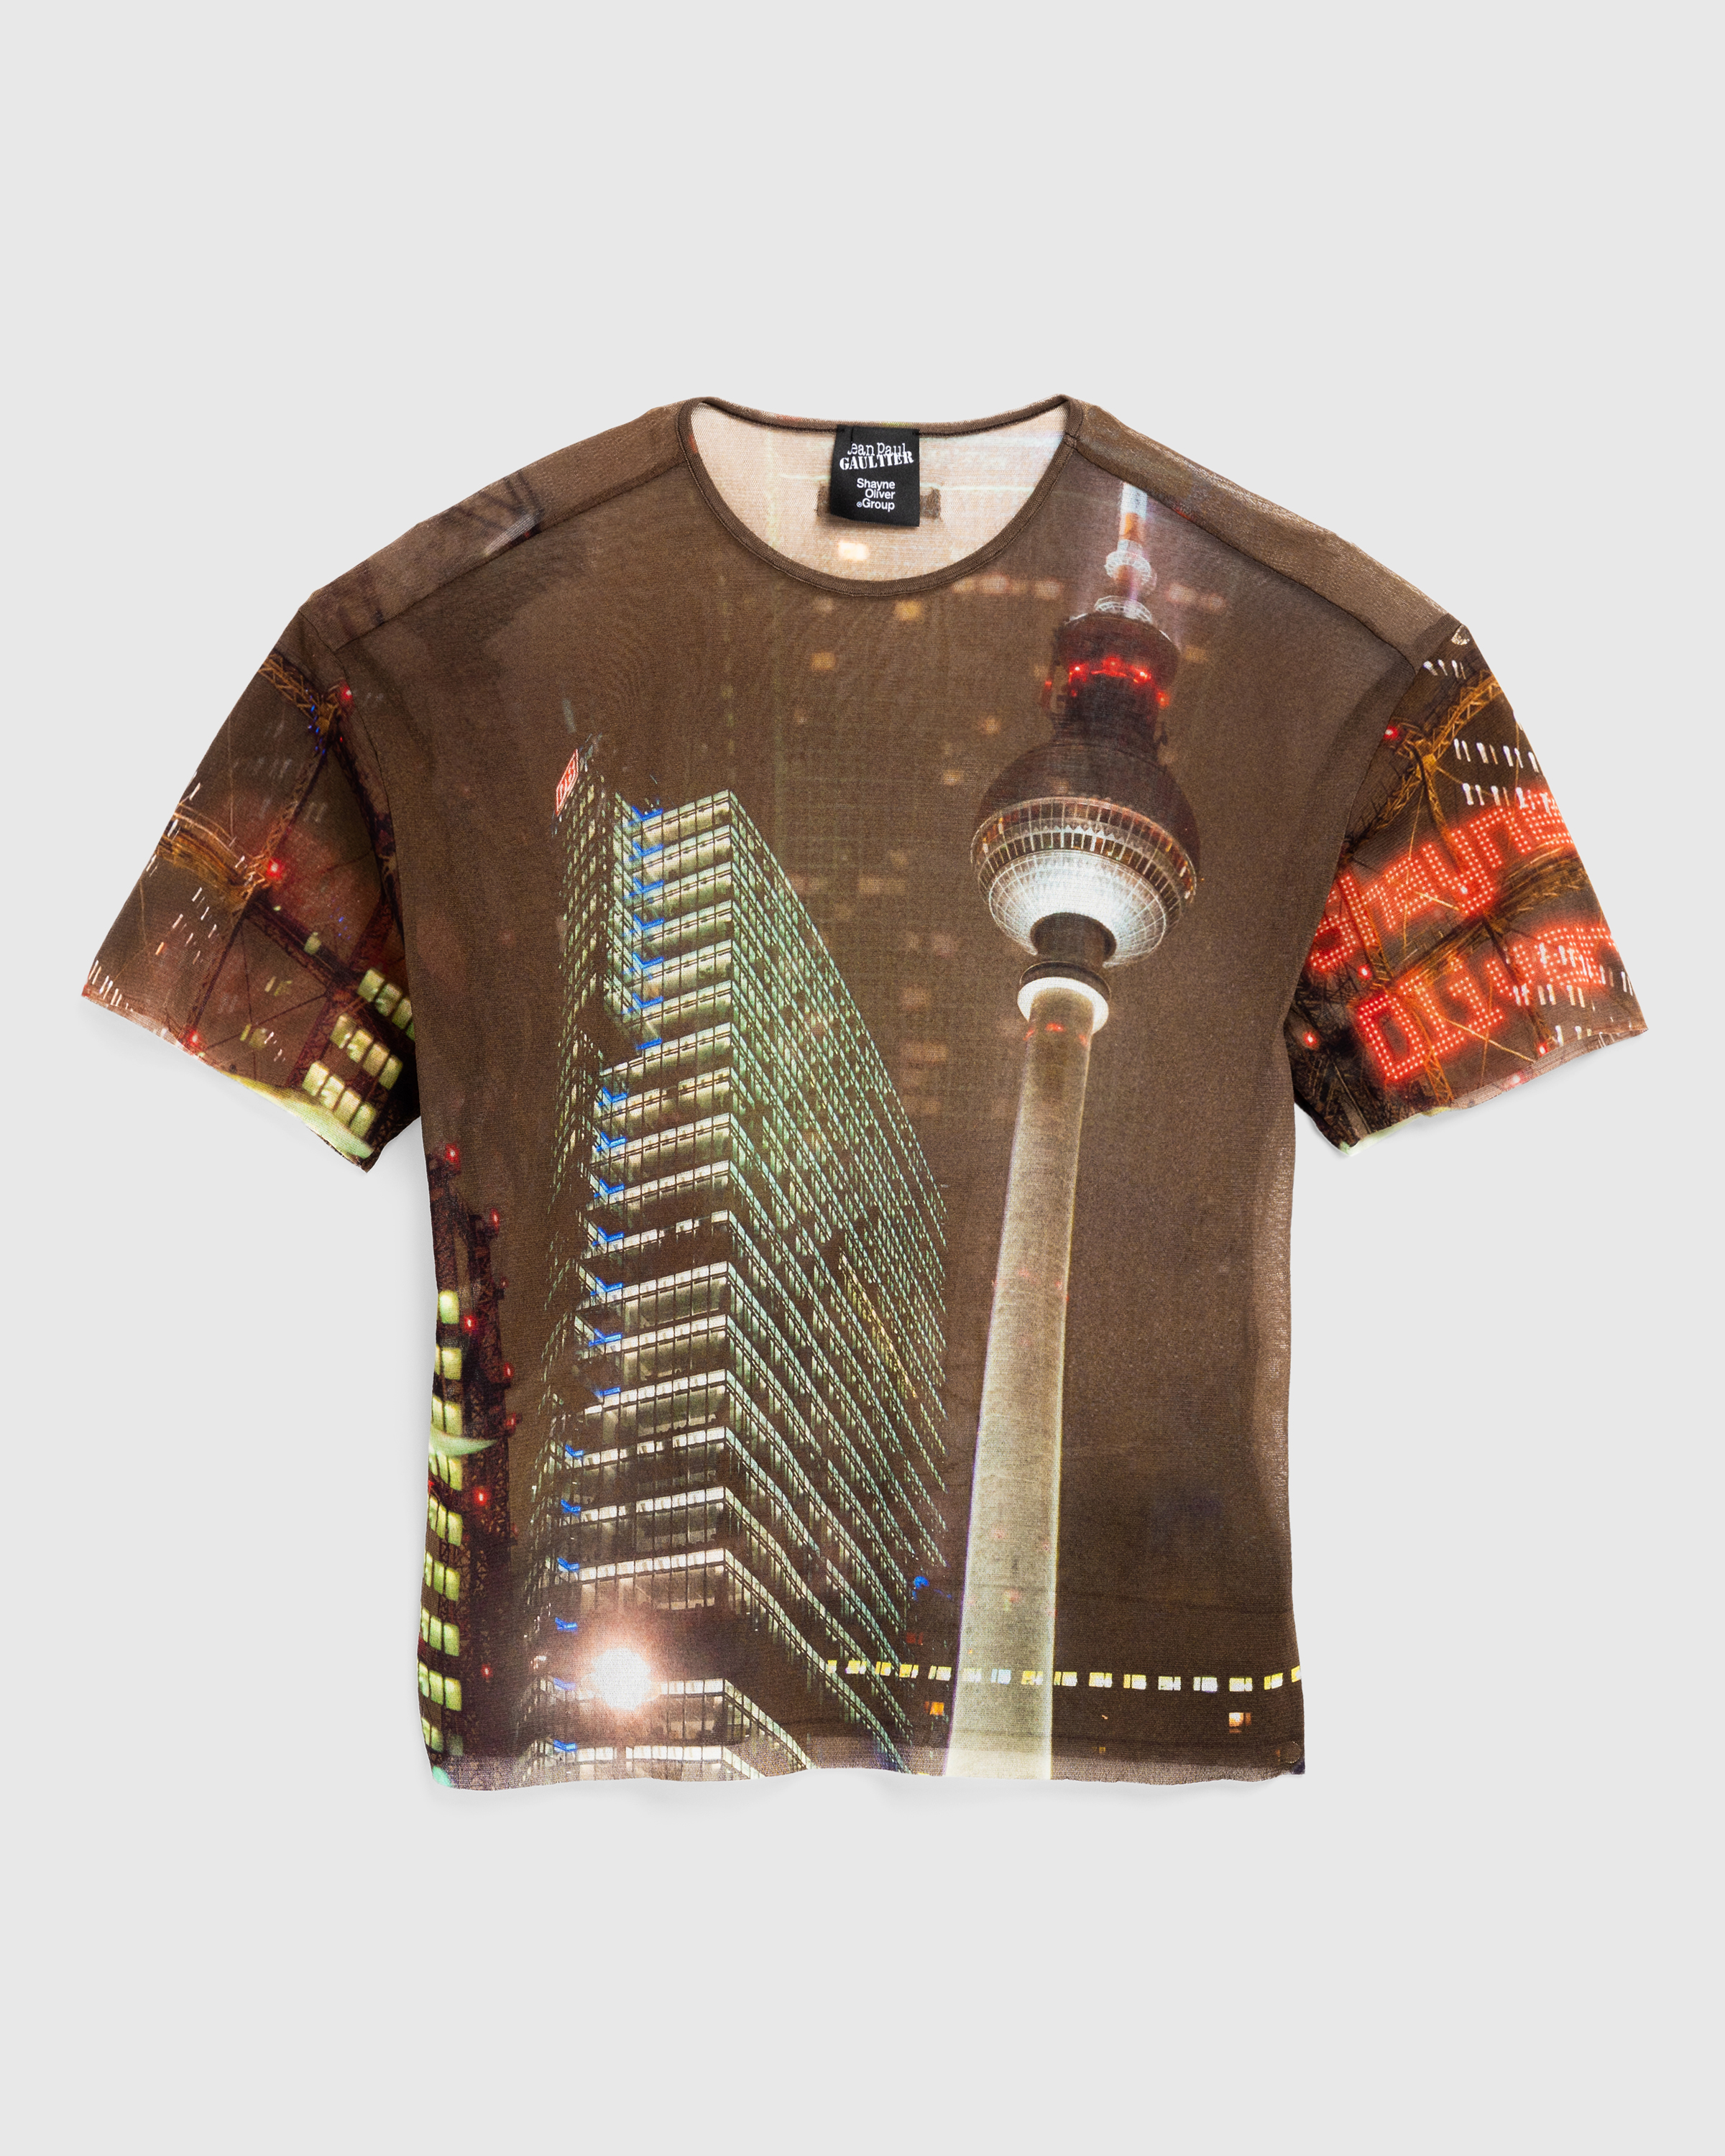 Jean Paul Gaultier x Shayne Oliver – Mesh Oversized Tee Printed "City" Brown/Green/Blue/Red - T-Shirts - Brown - Image 1